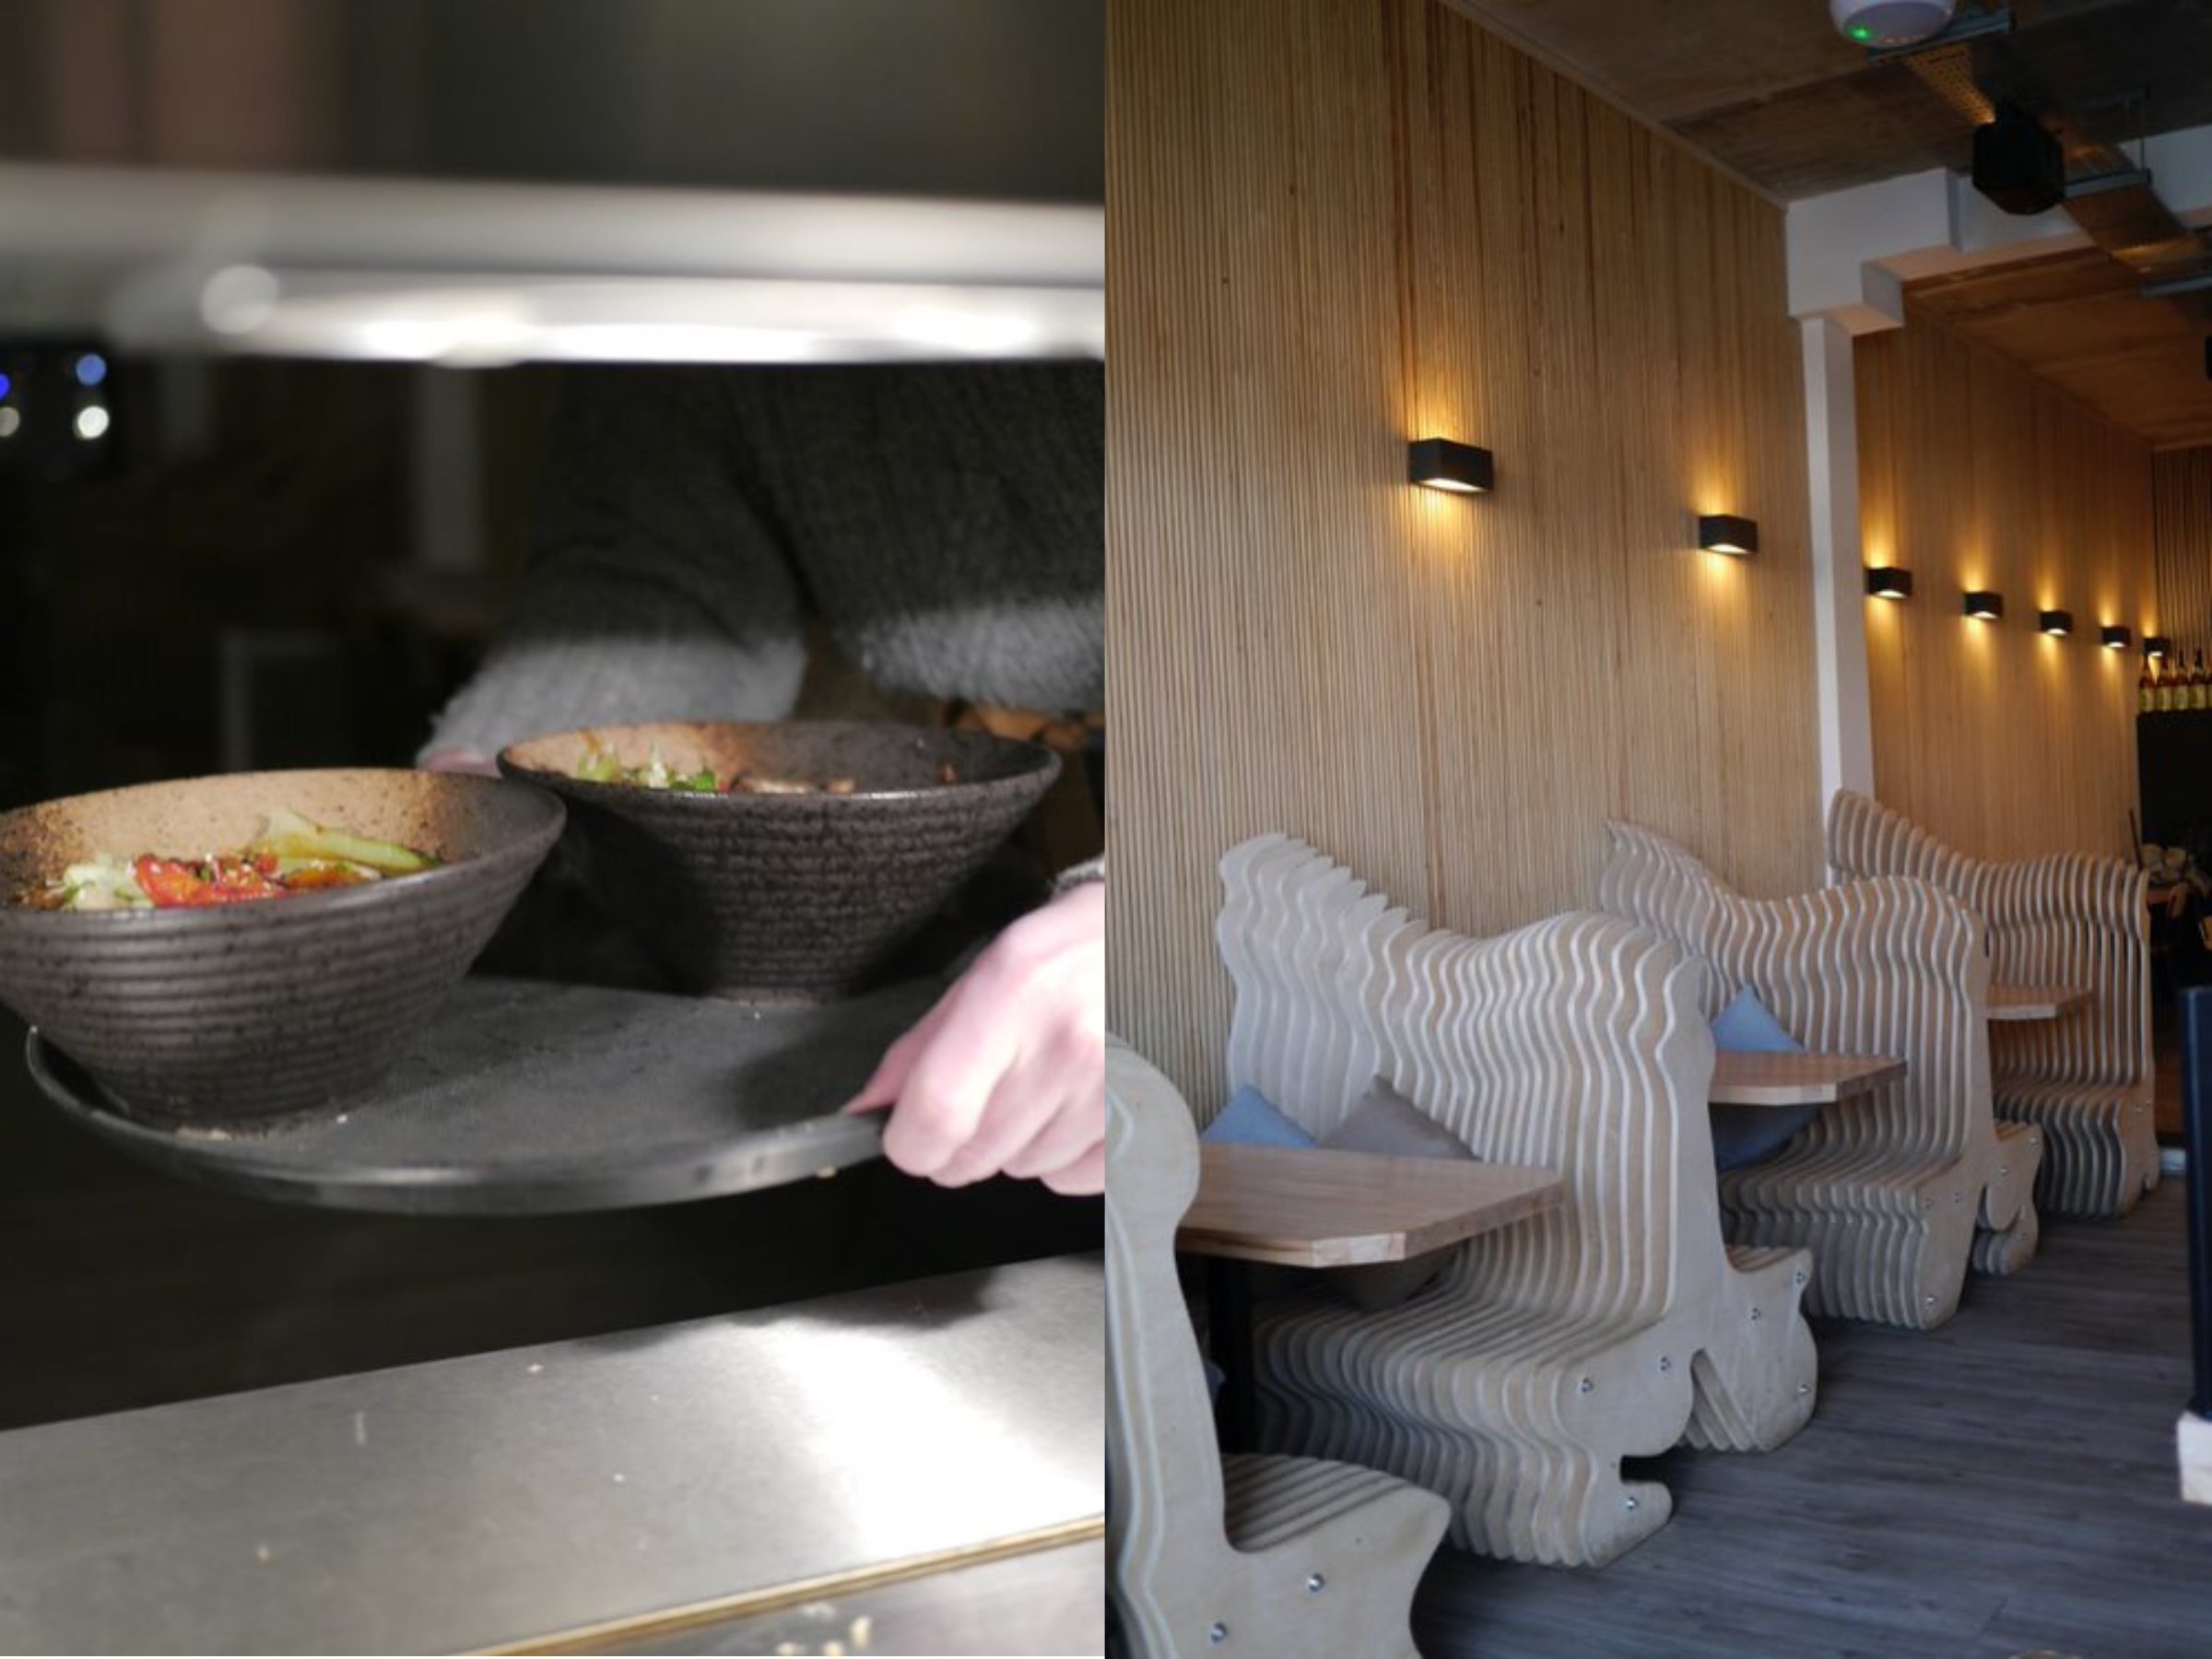 A collage of two images. The left is two bowls of food being held under a hotplate. The bowls are black. The right image is 3 booths.. Each booth has a bench and table and 2 cushions on the bench.